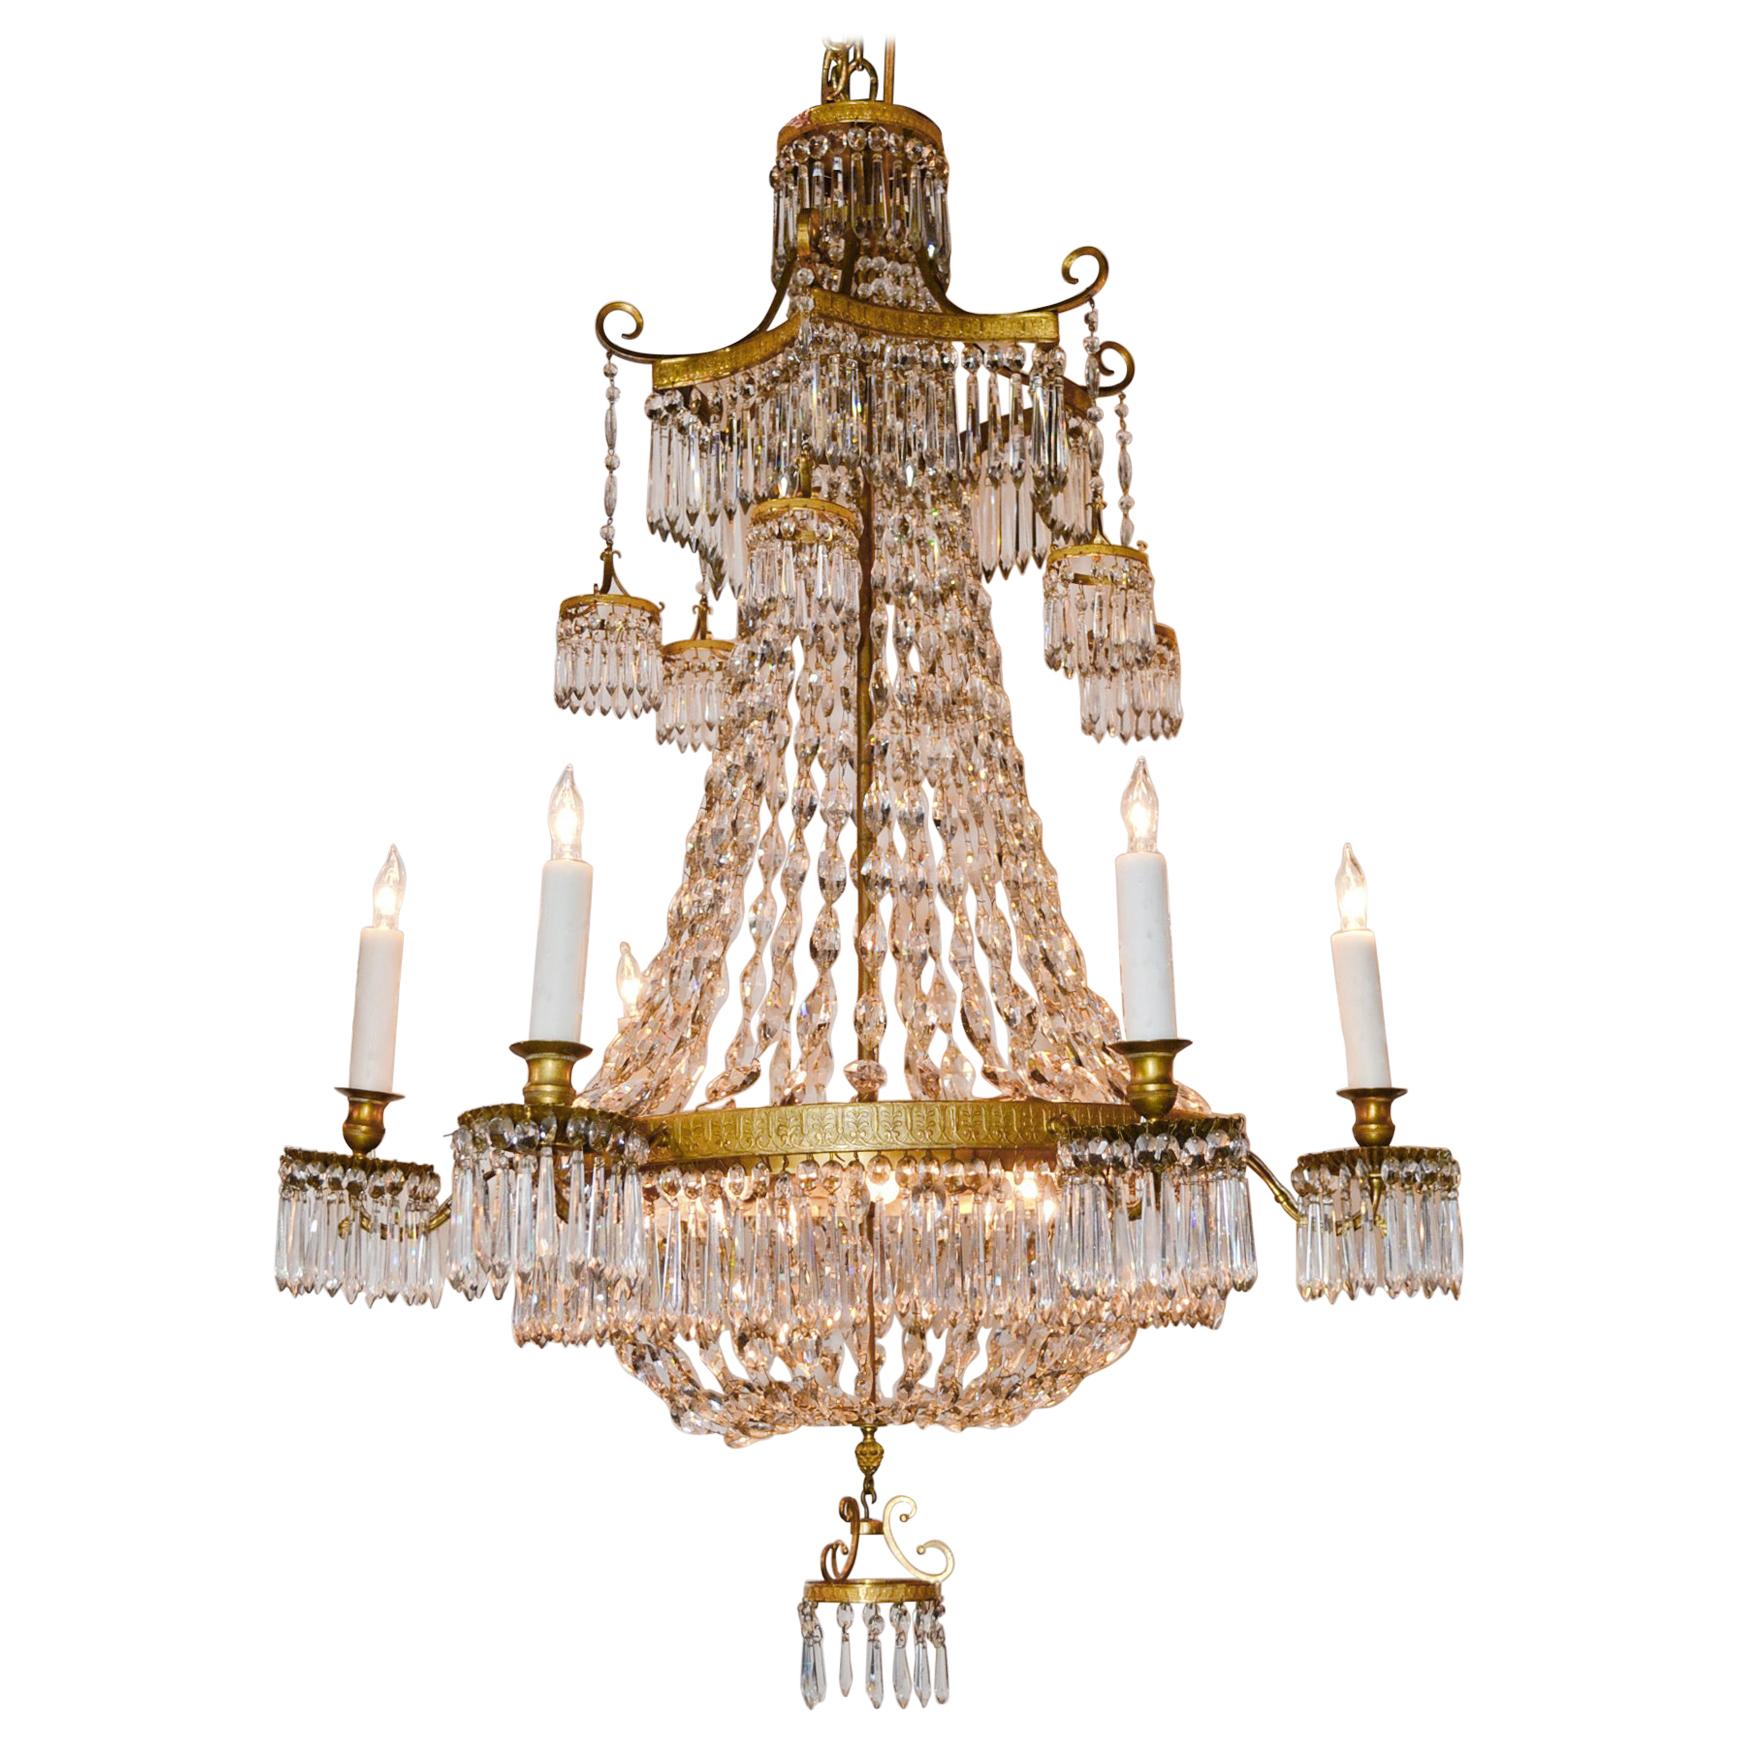 19th Century French Pagoda Inspired Chandelier